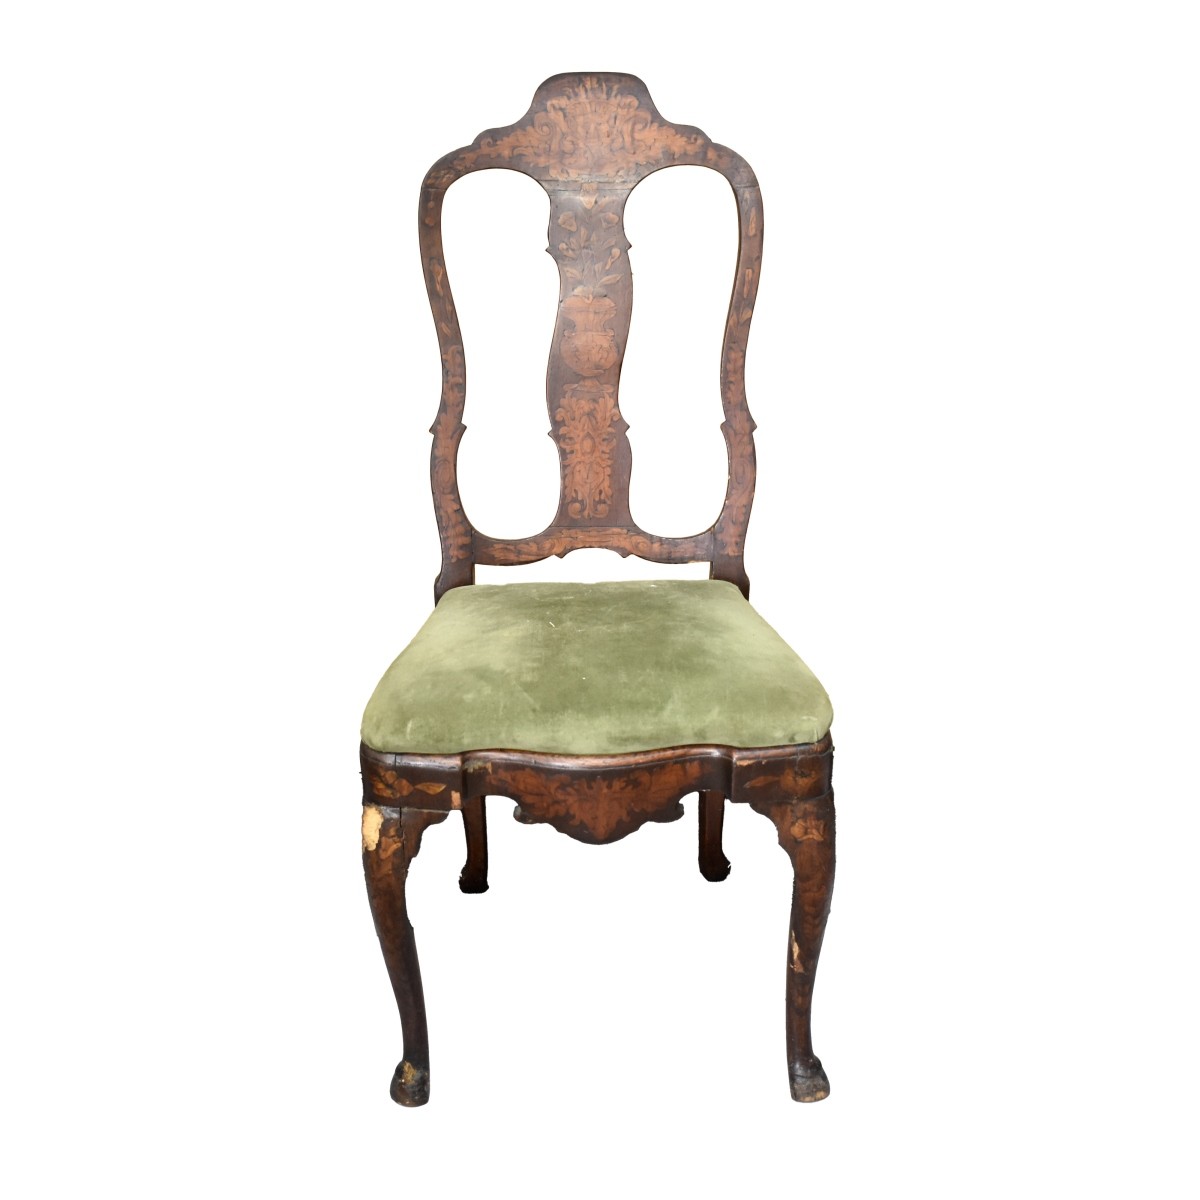 Antique Queen Anne Upholstered Dining Chairs